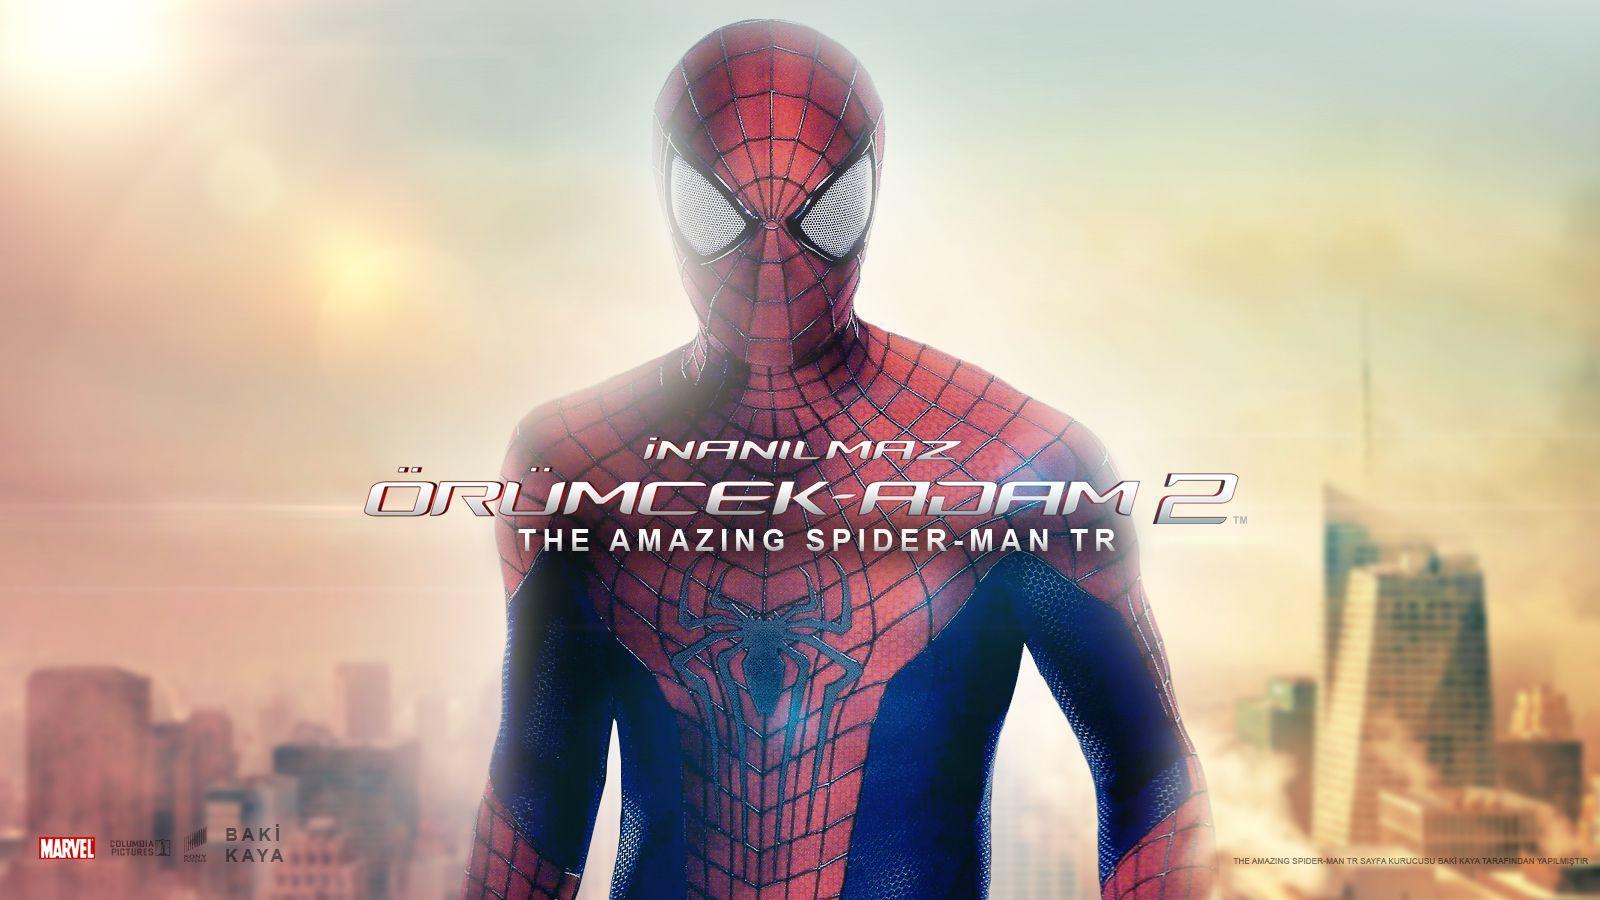 The Amazing SpiderMan Wallpaper HD Facebook Cover Photo 1024×576